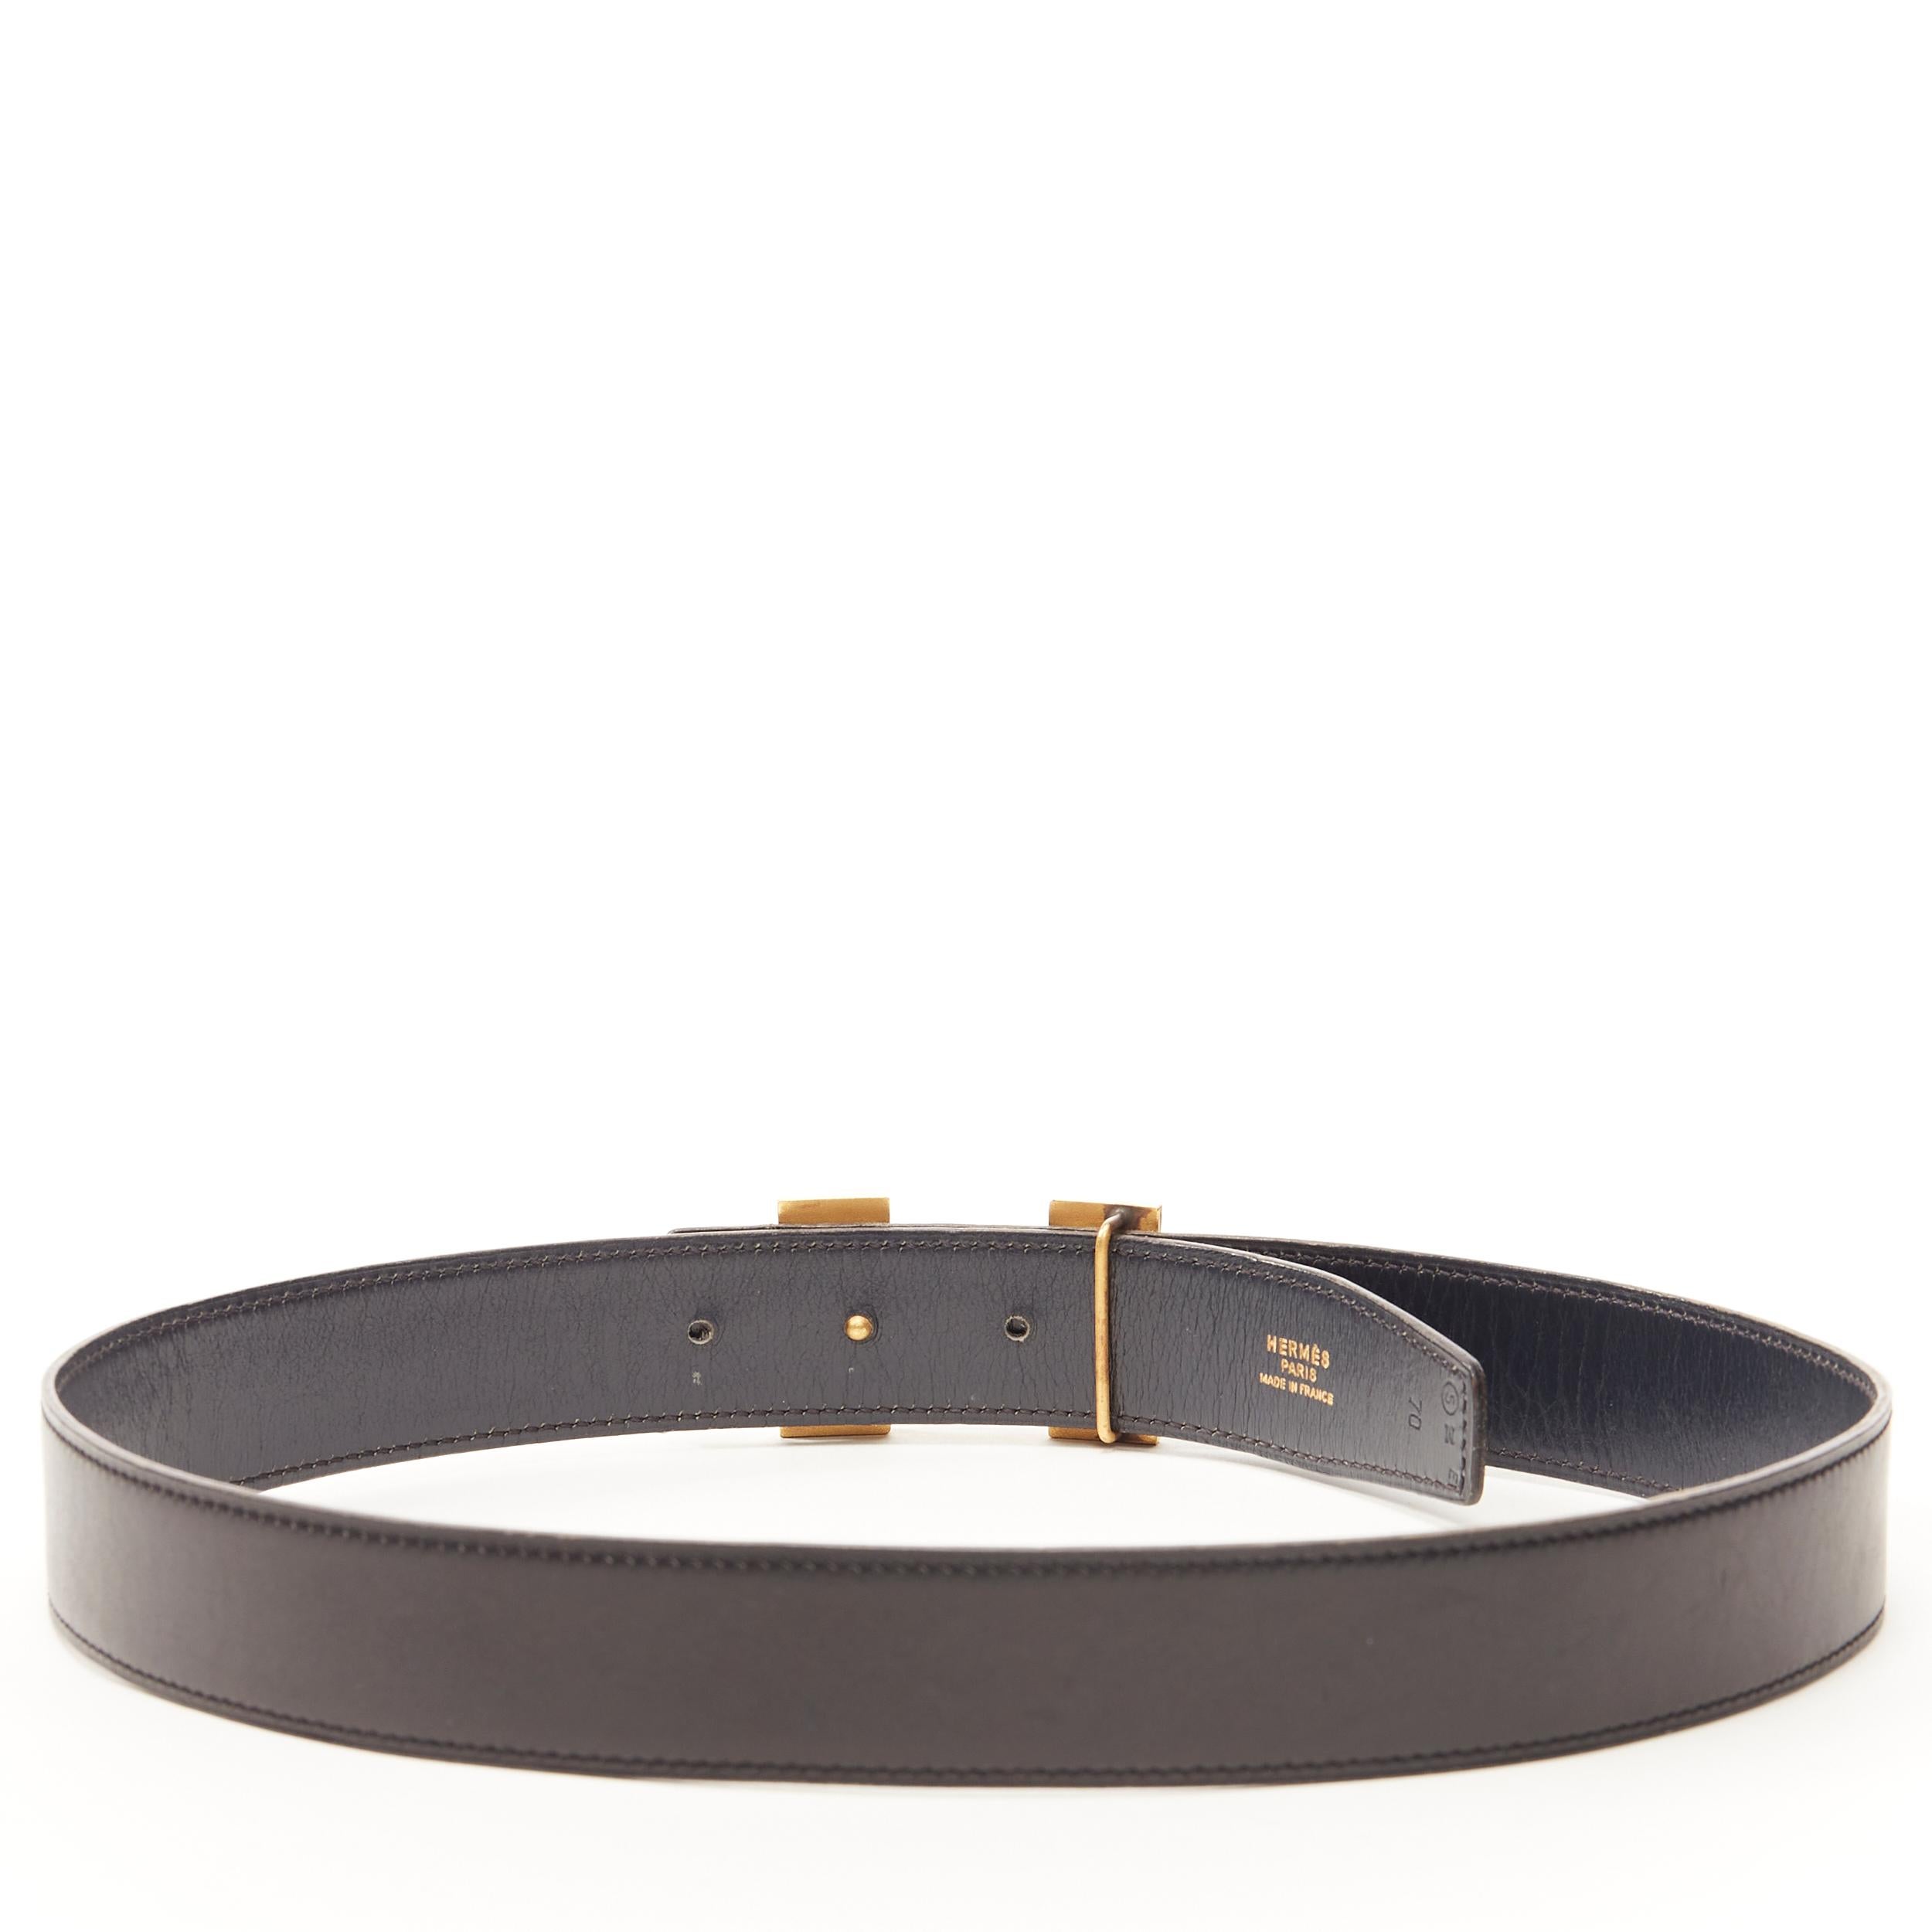 HERMES black leather hammered gold-tone H metal buckle leather belt FR 70 Reference: AEMA/A00002 
Brand: Hermes 
Material: Leather 
Color: Black 
Pattern: Solid 
Extra Detail: Glossy black leather. Hammered gold-tone H buckle. 70 size. Circle S